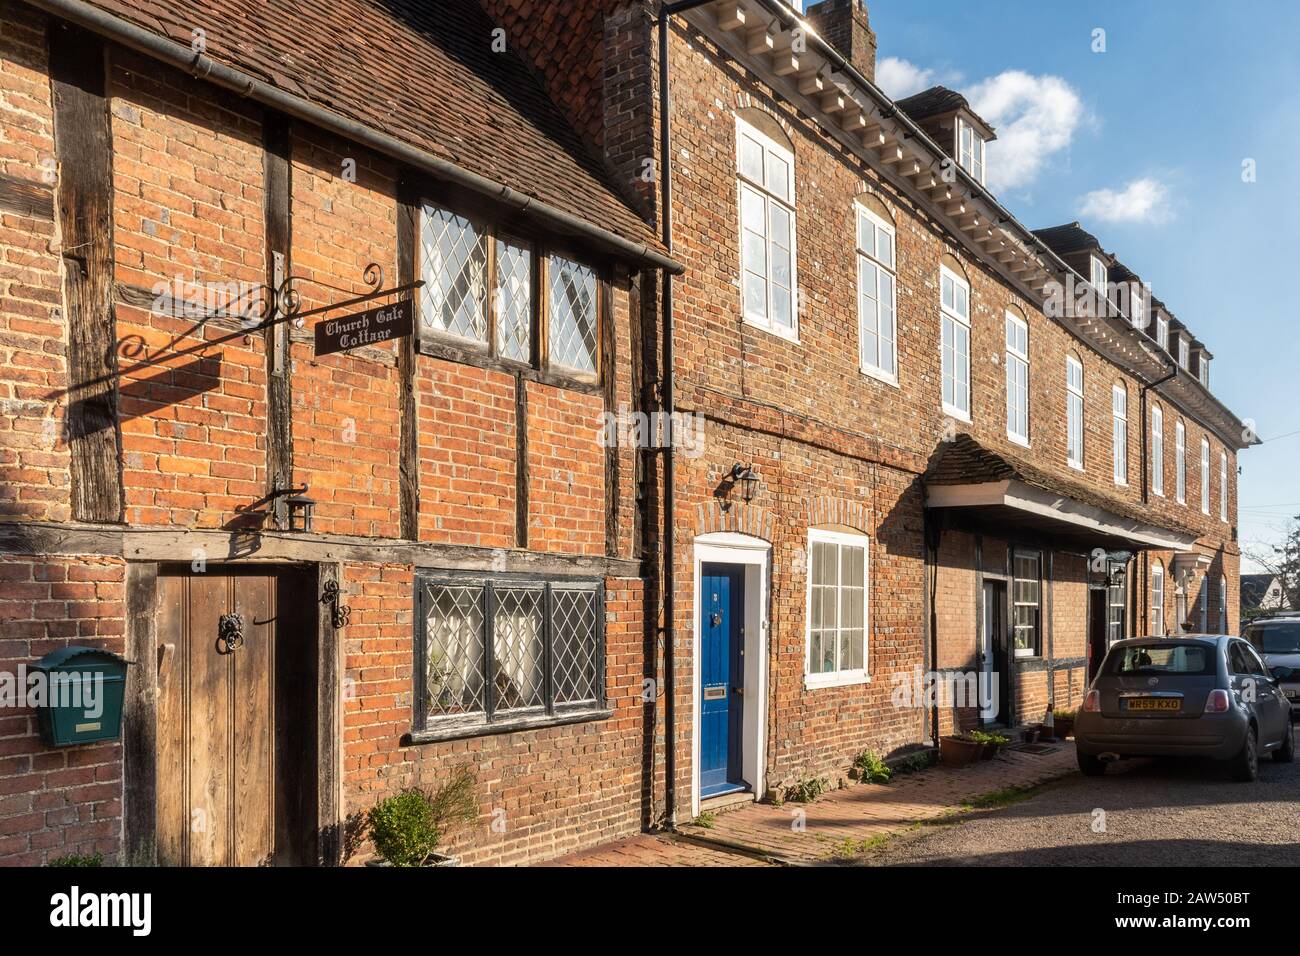 Lingfield village in East Surrey, UK. Church Gate Cottage, Church House and Star Inn Cottages, historic listed buildings. Stock Photo